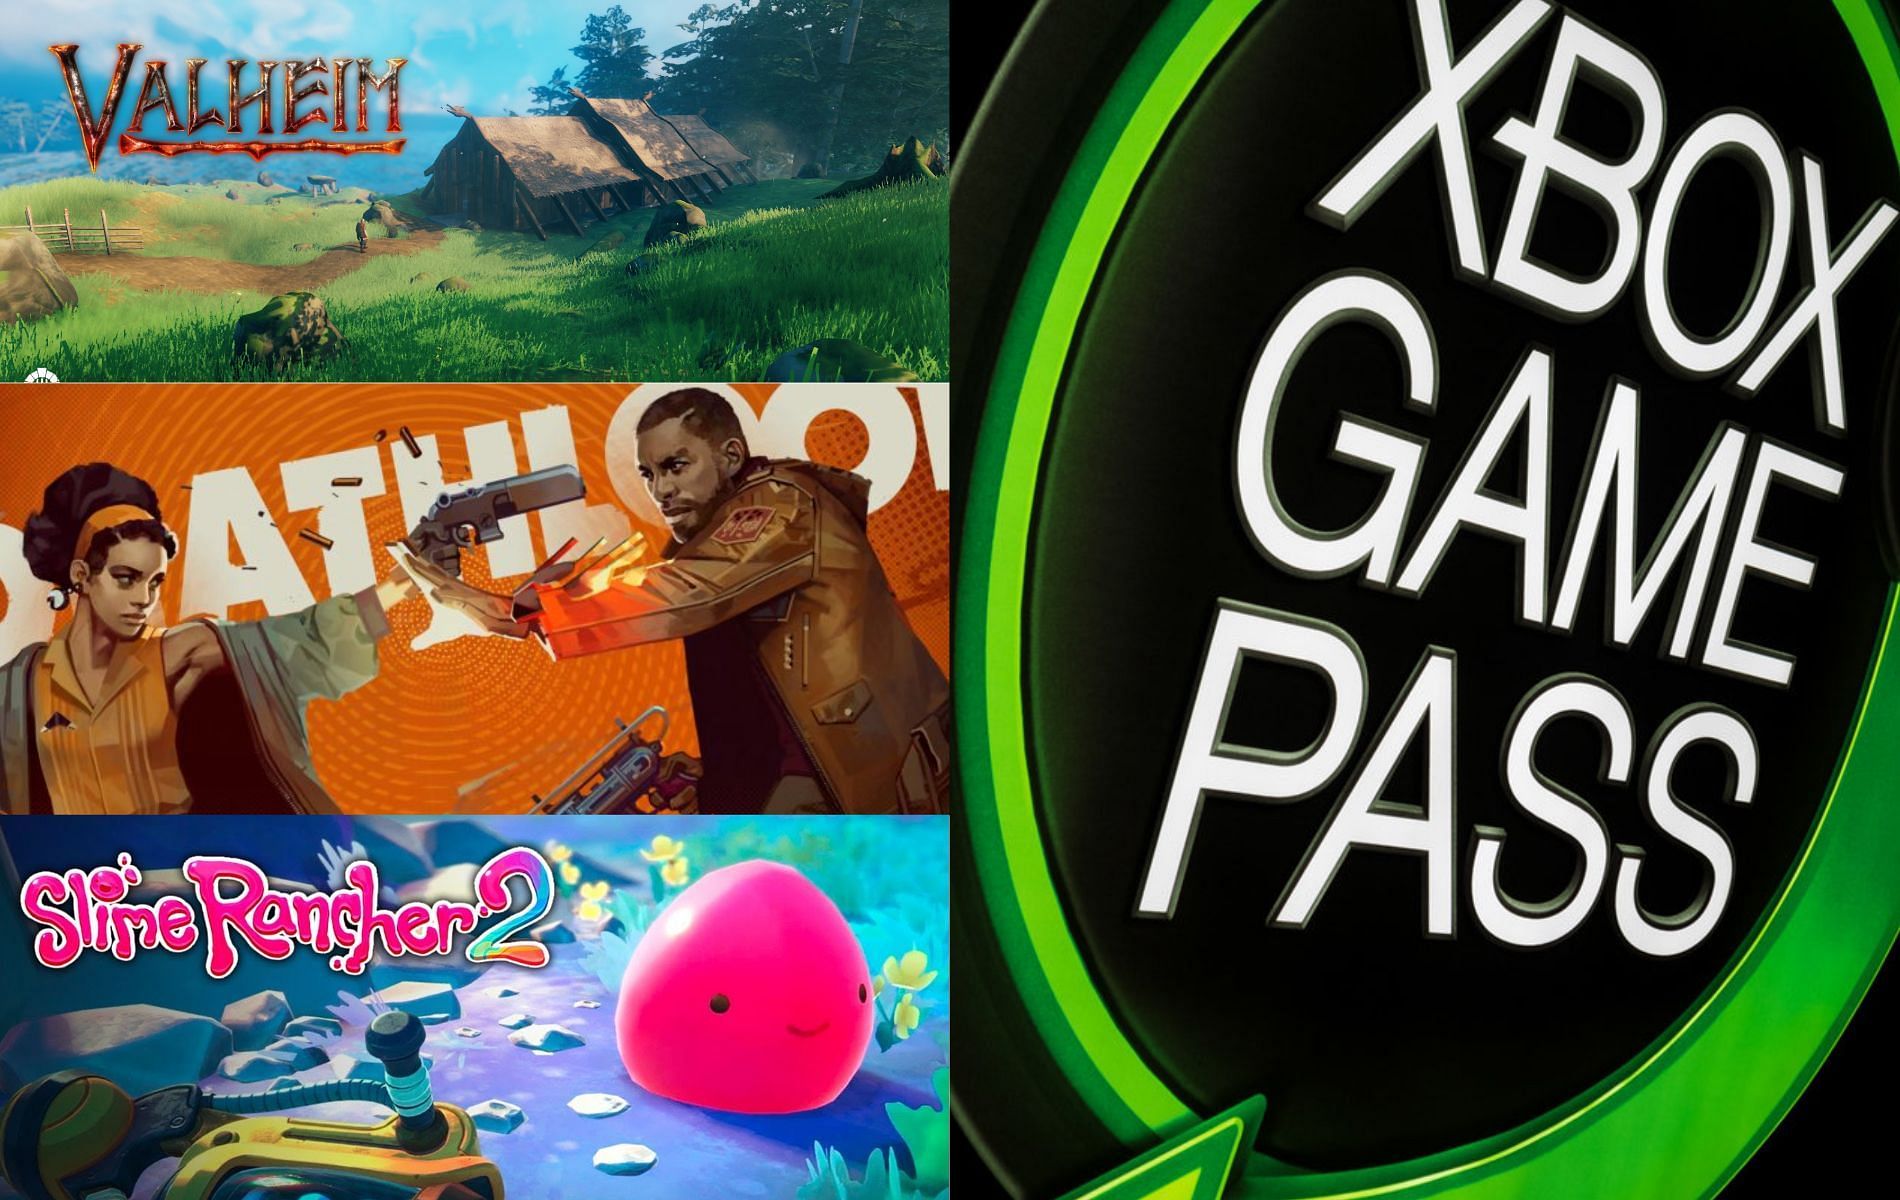 Slime Rancher 2 (2022), Xbox Series X, S Game